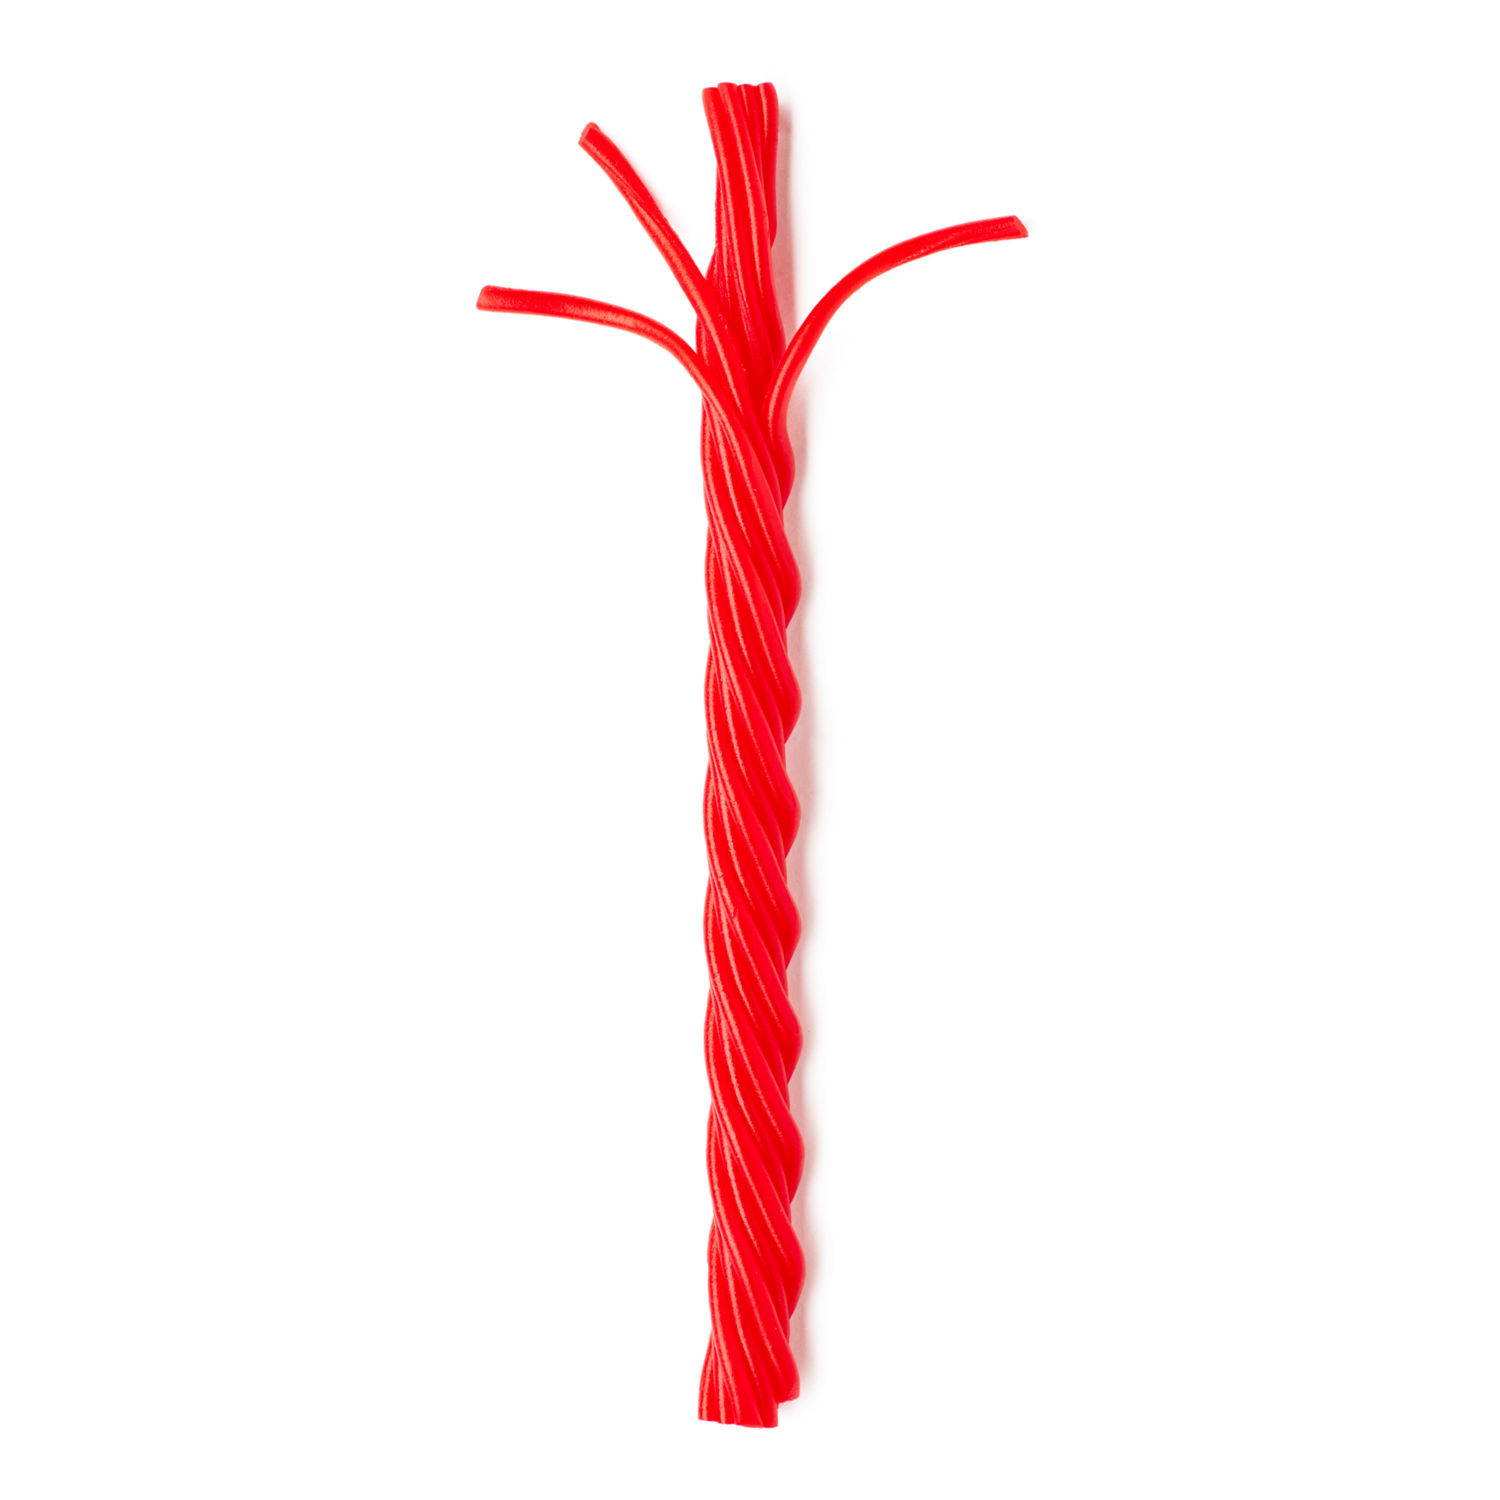 Twizzlers Pull 'N' Peel Cherry Flavored Licorice Style Low Fat Candy, Big Bag 28 oz - image 4 of 9